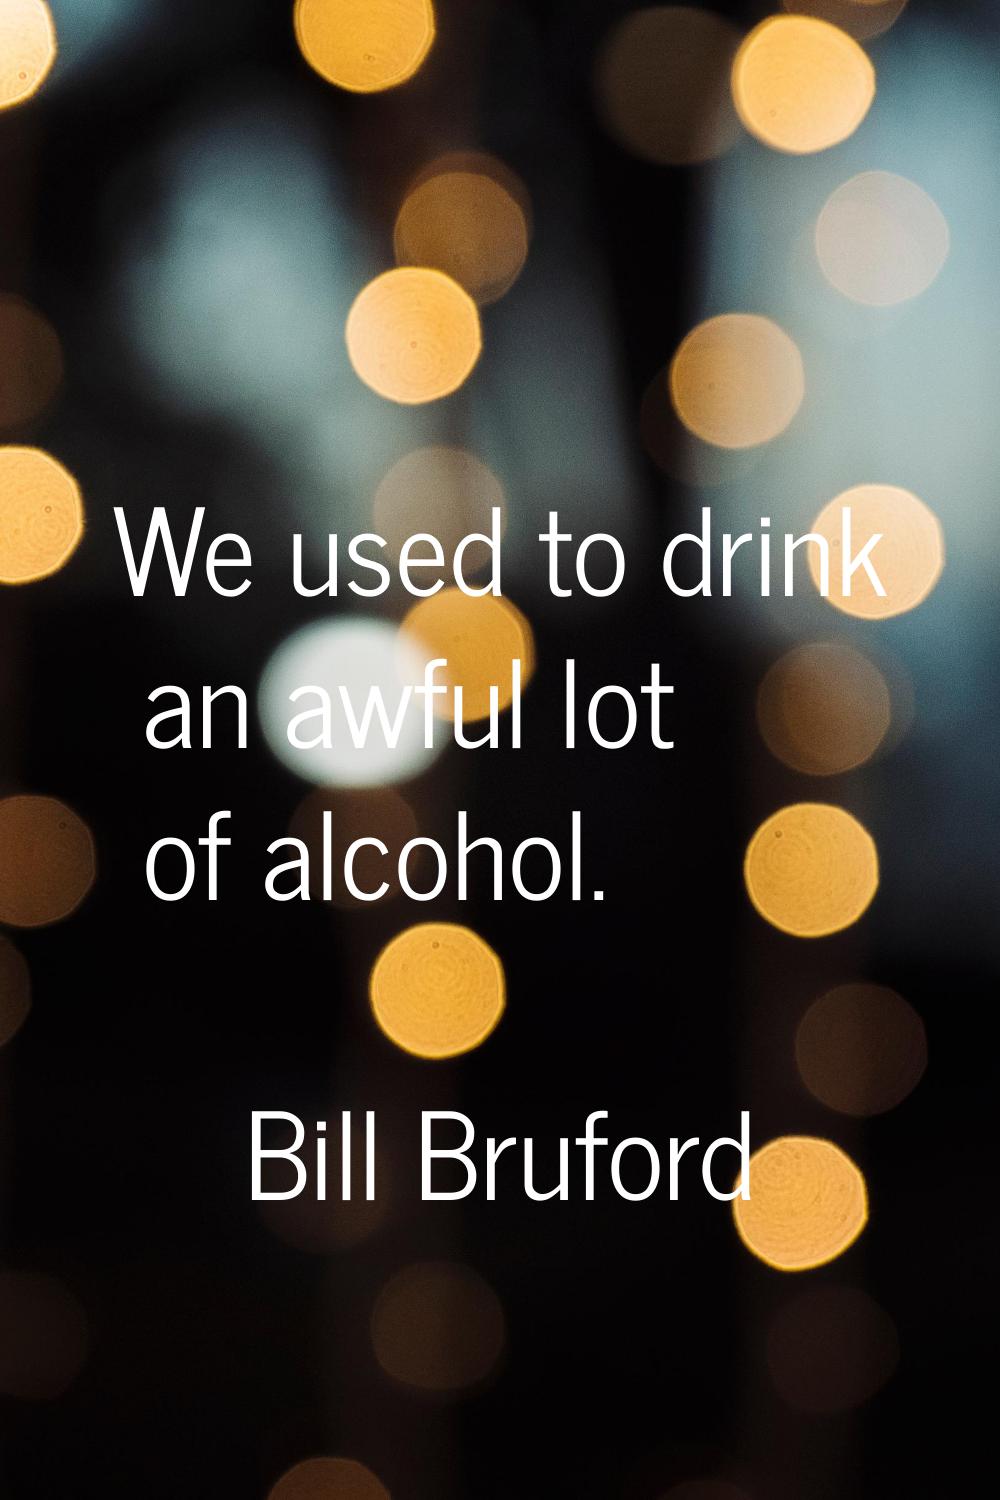 We used to drink an awful lot of alcohol.